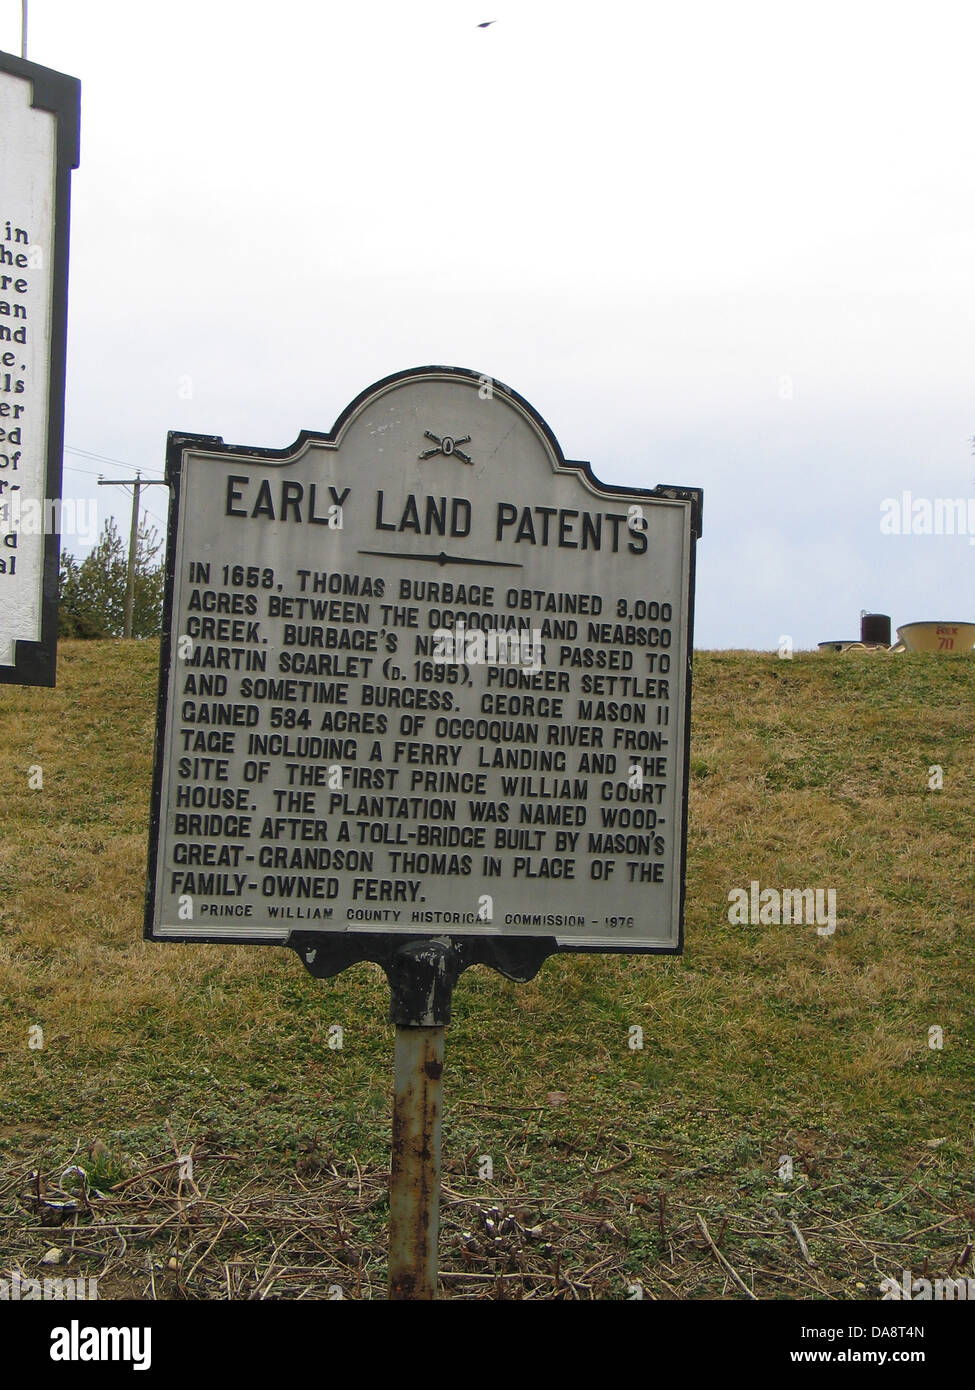 EARLY LAND PATENTS In 1653, Thomas Burbage obtained 8,000 acres between the Occoquan and Neabsco Creek. Burbage's Neck later passed to Martin Scarlet (D. 1695), pioneer settler and sometime Burgess, George Mason II gained 584 acres of Occoquan River frontage on the first Prince William Court House. The plantation was named Woodbridge after a toll-bridge built by Mason's great-grandson Thomas in place of the family-owned ferry. Prince William County Historical Commission - 1976 Stock Photo